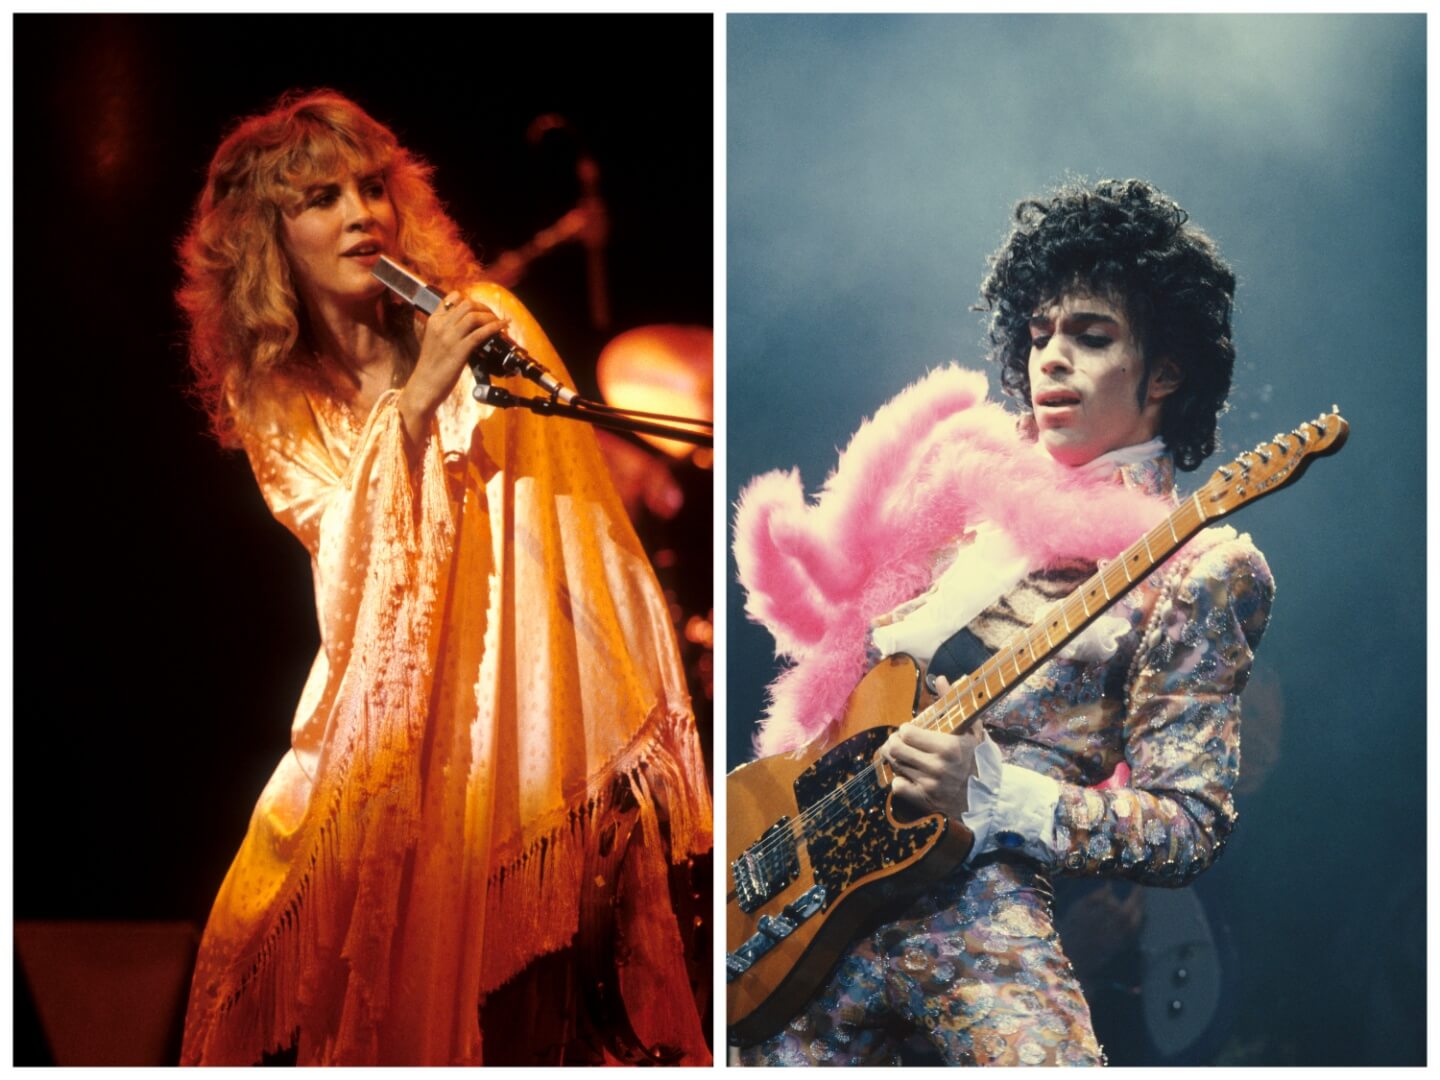 Stevie Nicks wears a shawl and sings into a microphone. Prince wears a pink boa and floral suit and plays guitar.